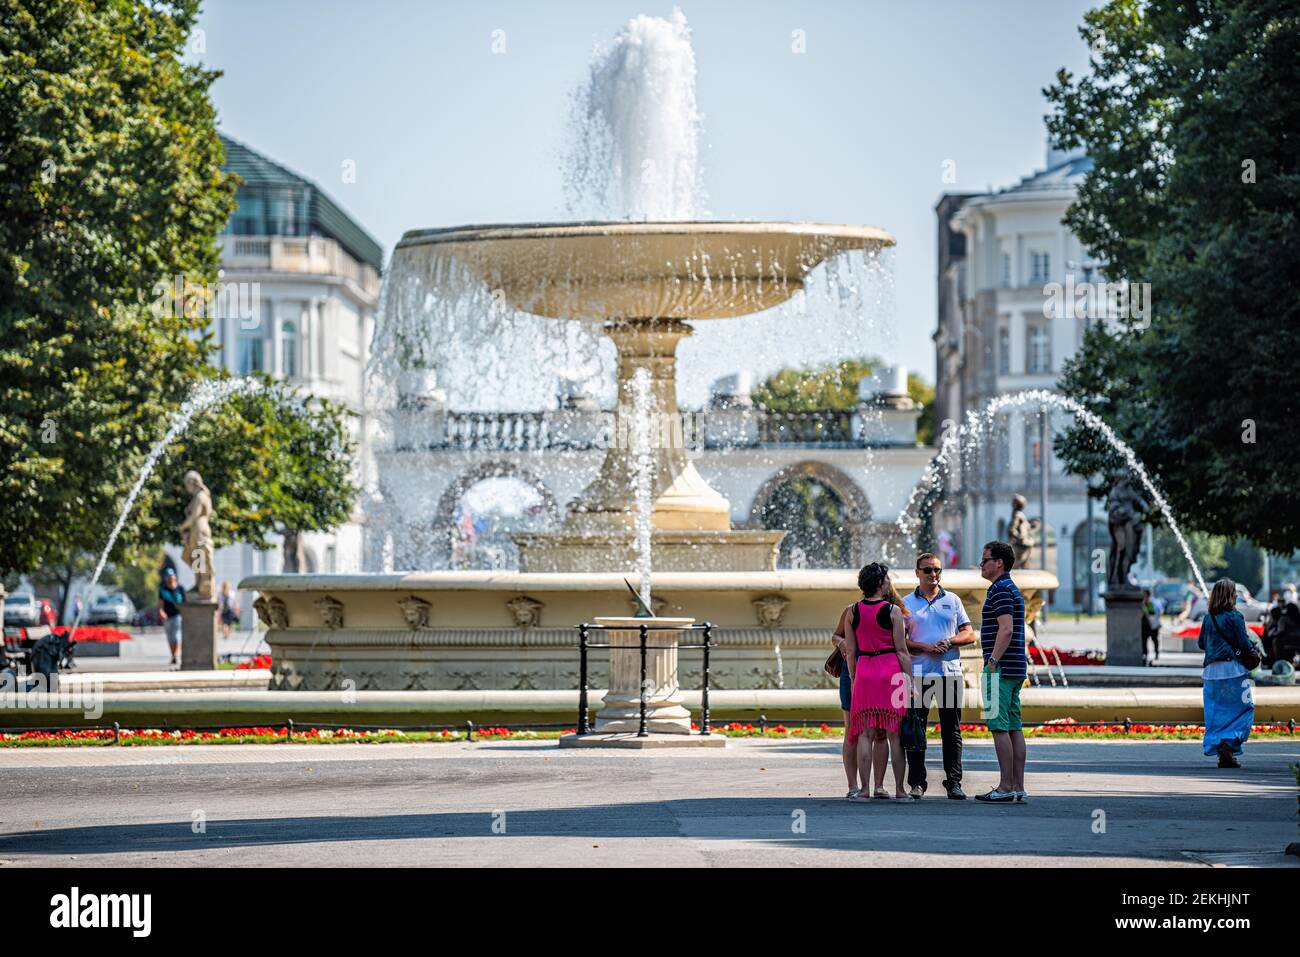 Warsaw, Poland - August 23, 2018: Tourists people by water fountain square in summer Saxon Gardens Park with spraying splashing sculptures Stock Photo